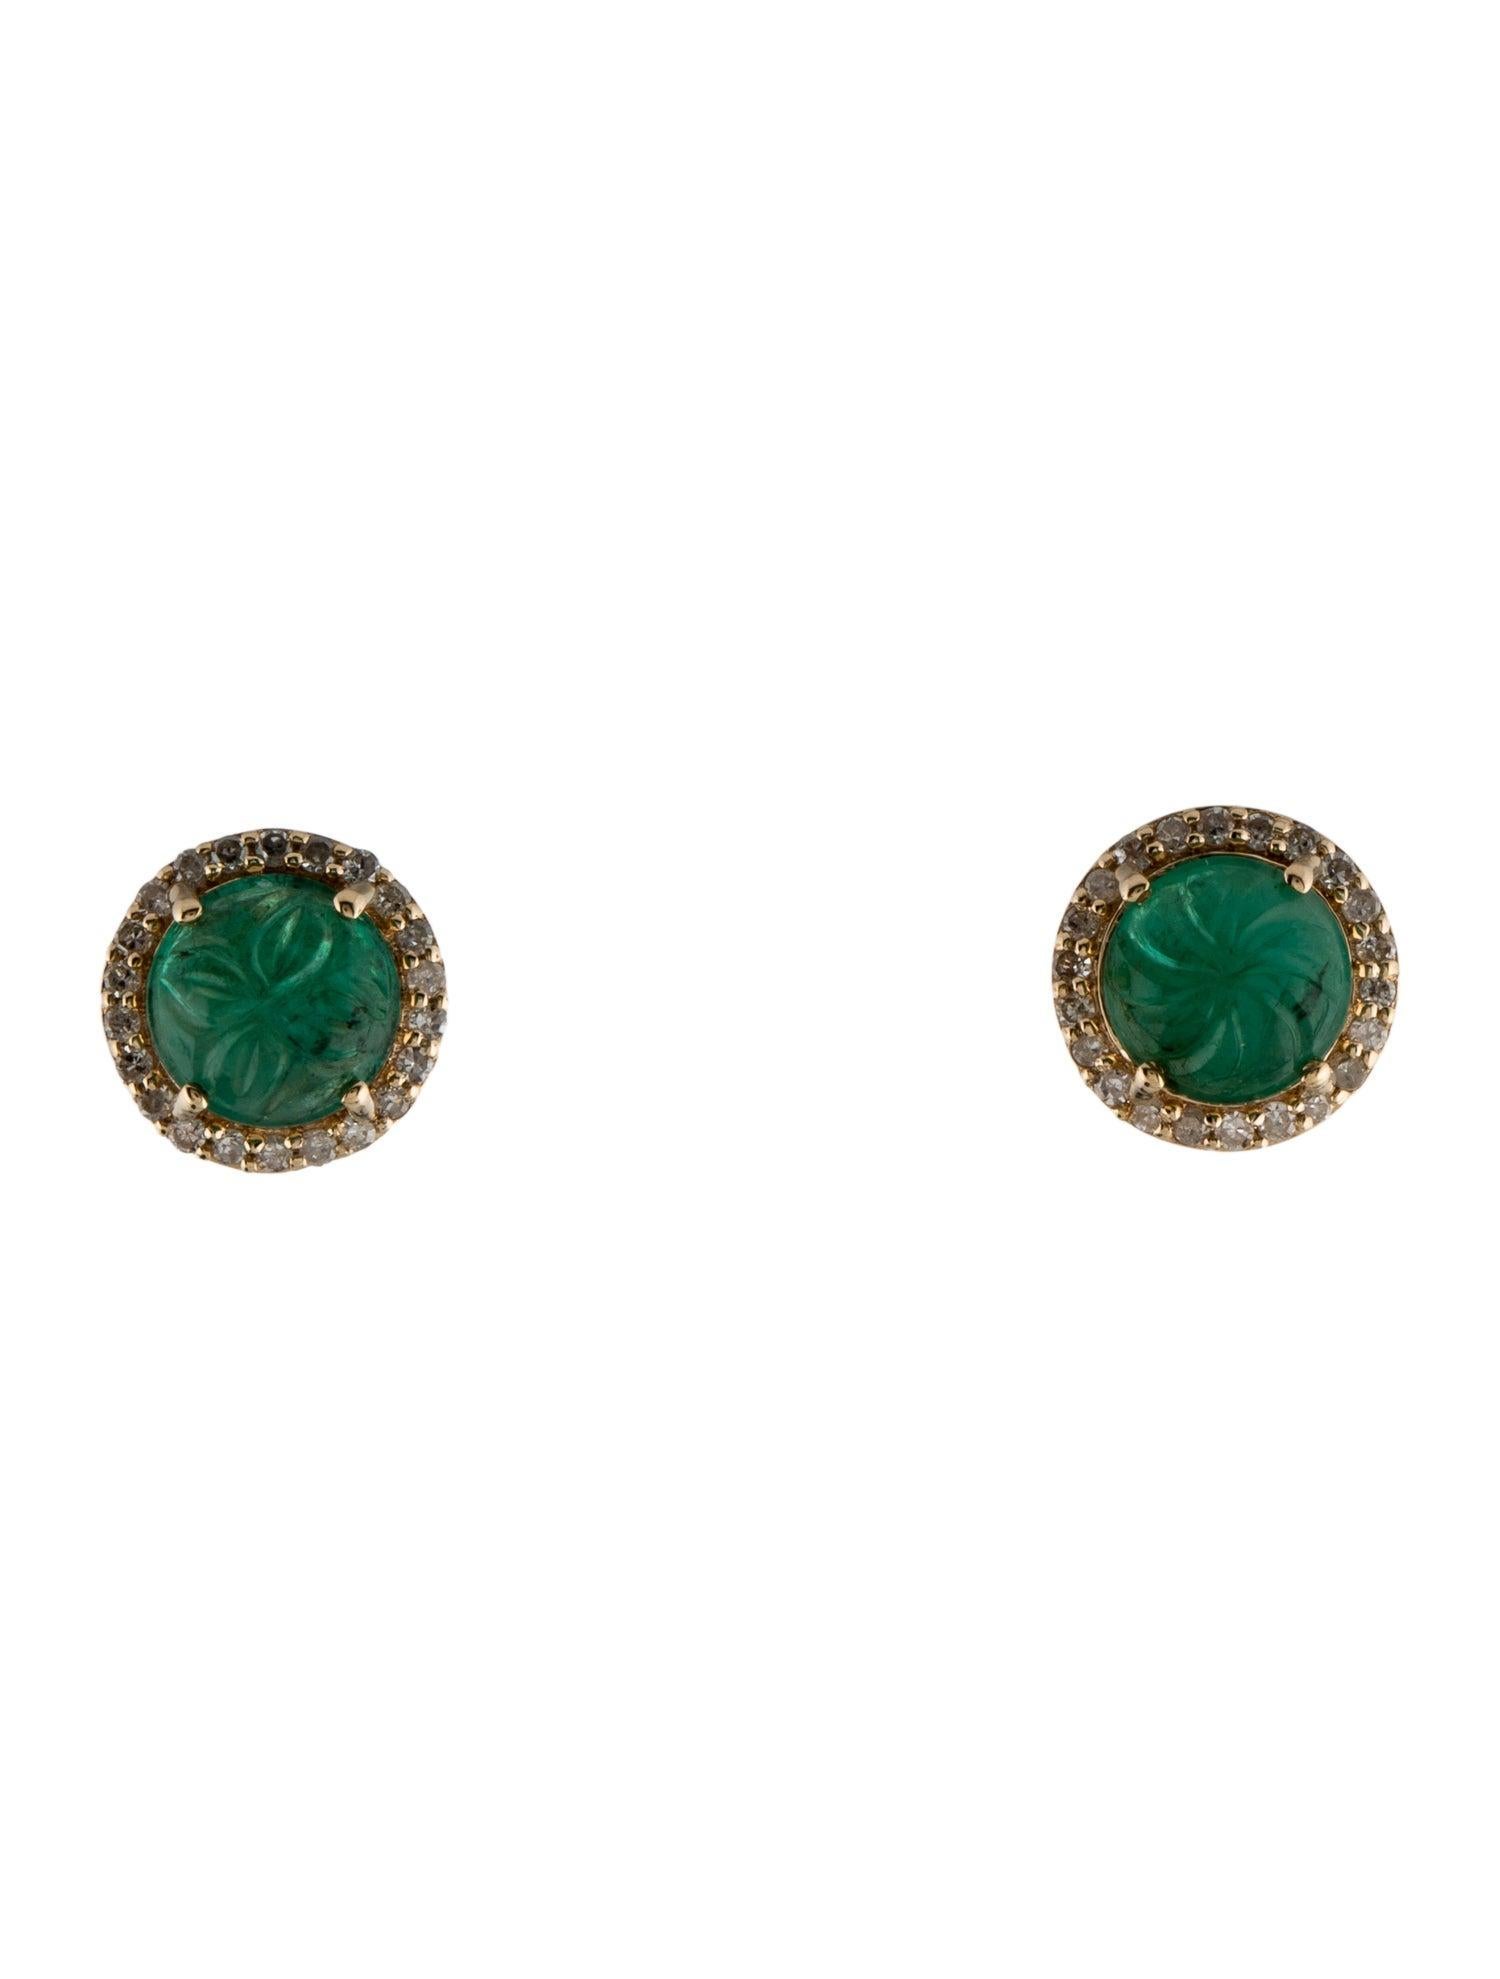 Immerse yourself in the enchanting allure of nature with our Forest Ferns Emerald and Diamond Earrings from Jeweltique. This exquisite pair is a testament to the verdant beauty that surrounds us, capturing the essence of lush forests in every